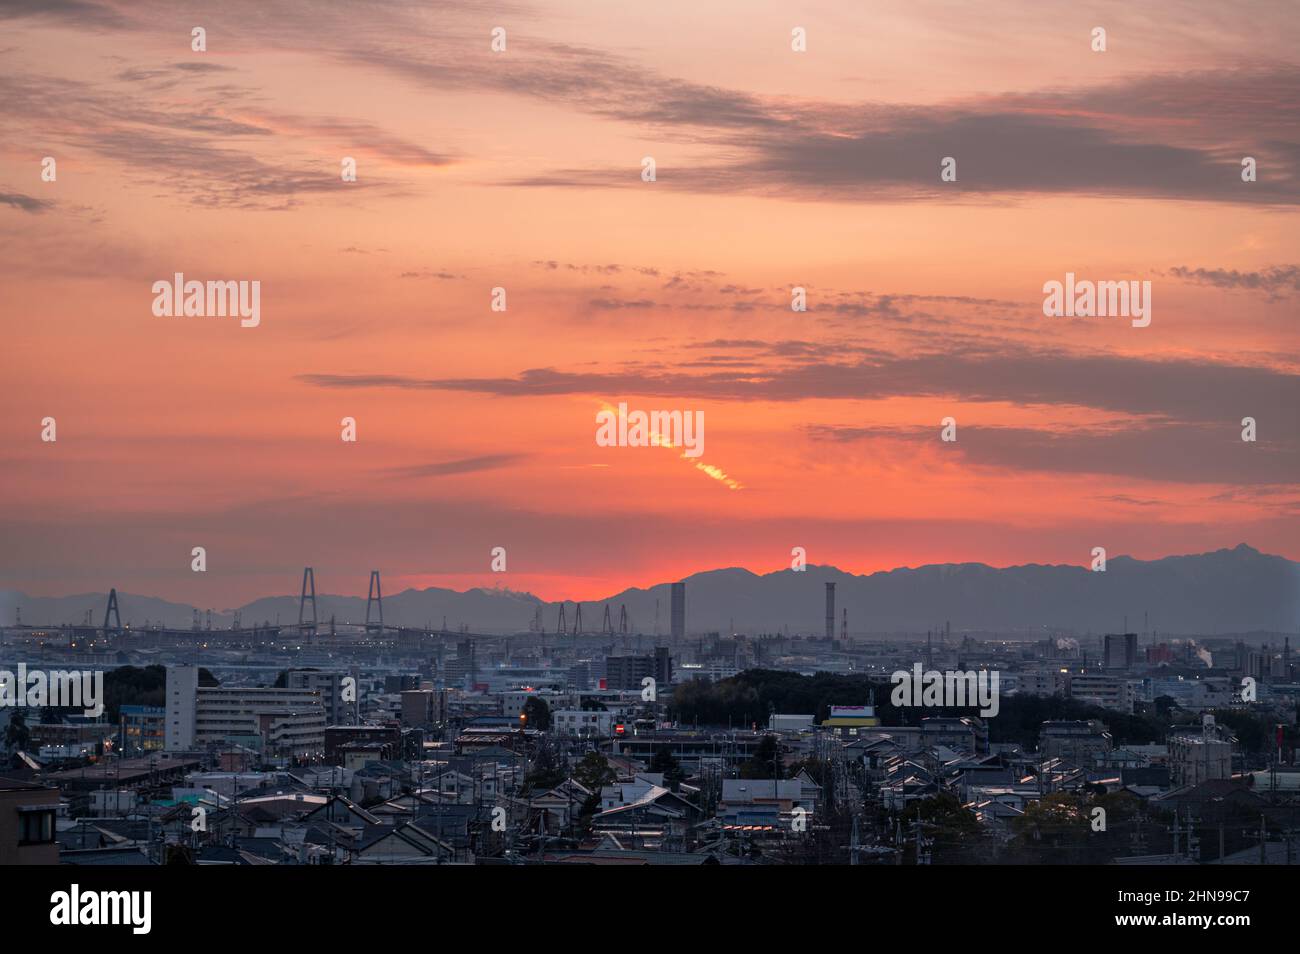 Red sky sunset, overview from a high place. Japanese city of Nagoya with mountains in the background. Stock Photo